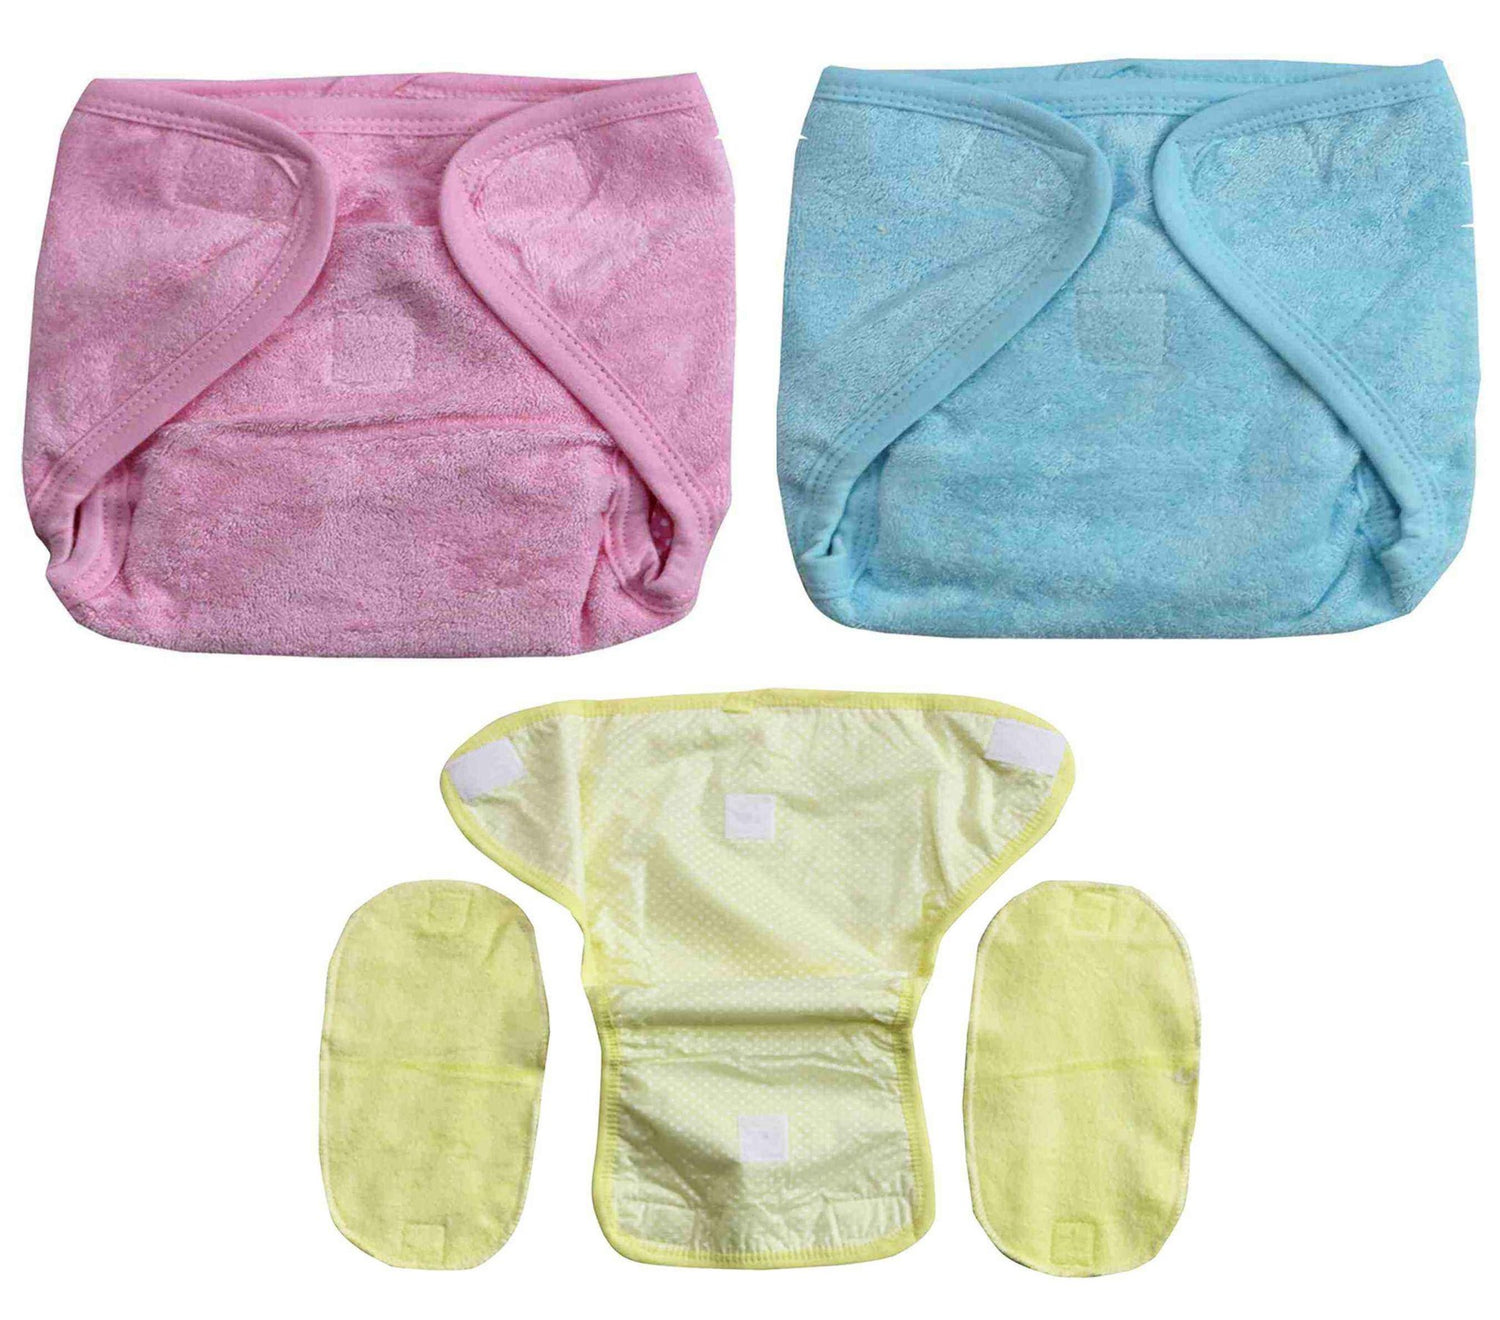 Newborn pure soft cotton reusable padded diapers or nappies pack of 3 pcs. - FAVISM